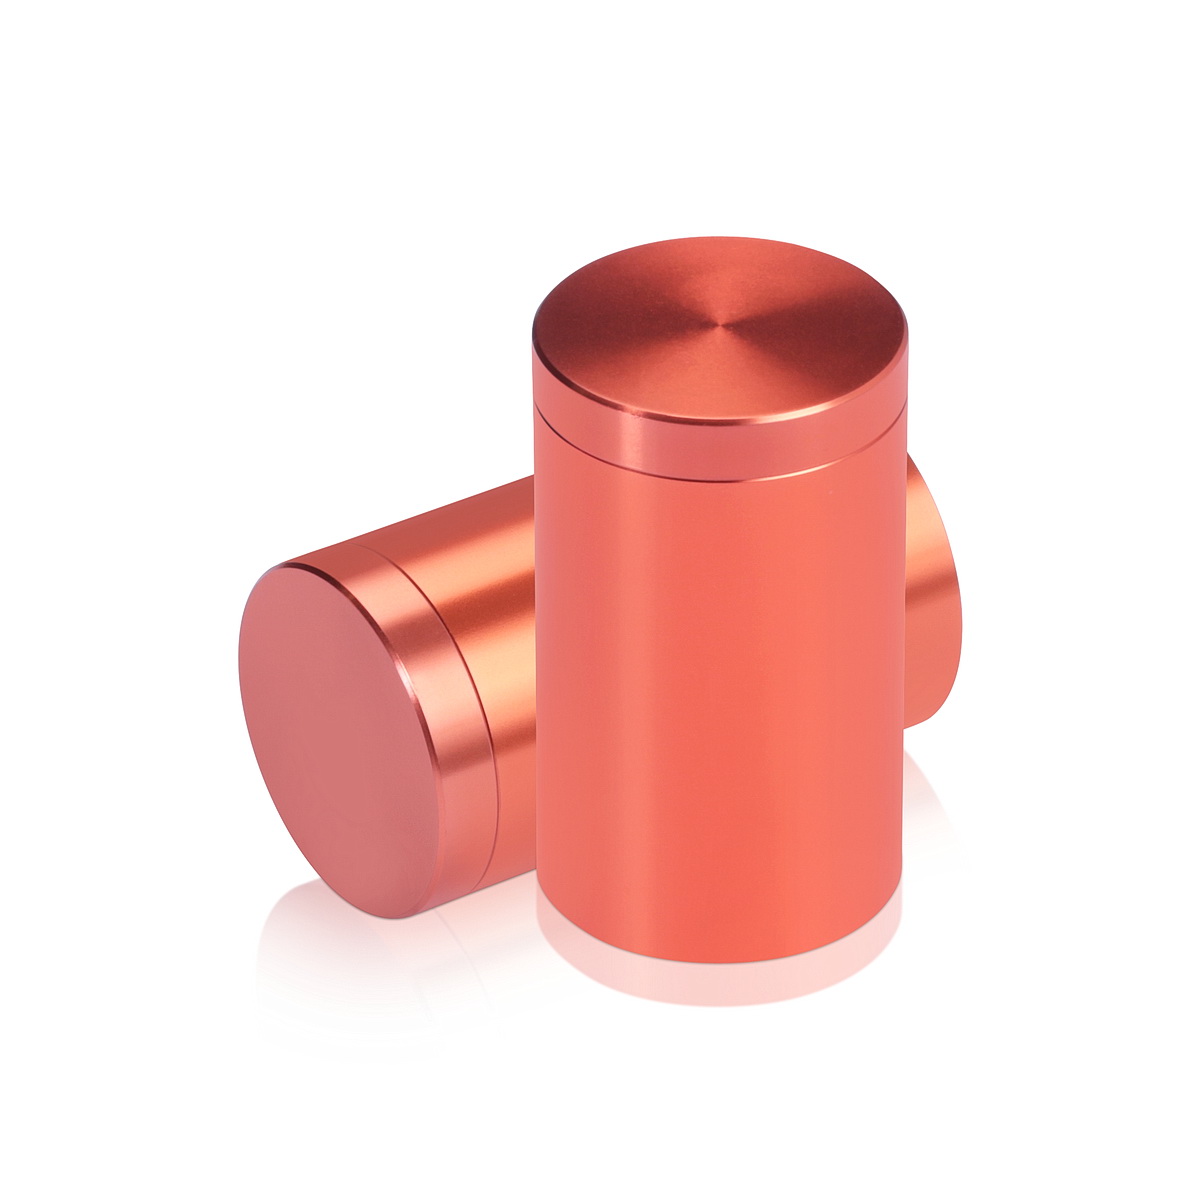 1'' Diameter X 1-1/2'' Barrel Length, Affordable Aluminum Standoffs, Copper Anodized Finish Easy Fasten Standoff (For Inside / Outside use) [Required Material Hole Size: 7/16'']